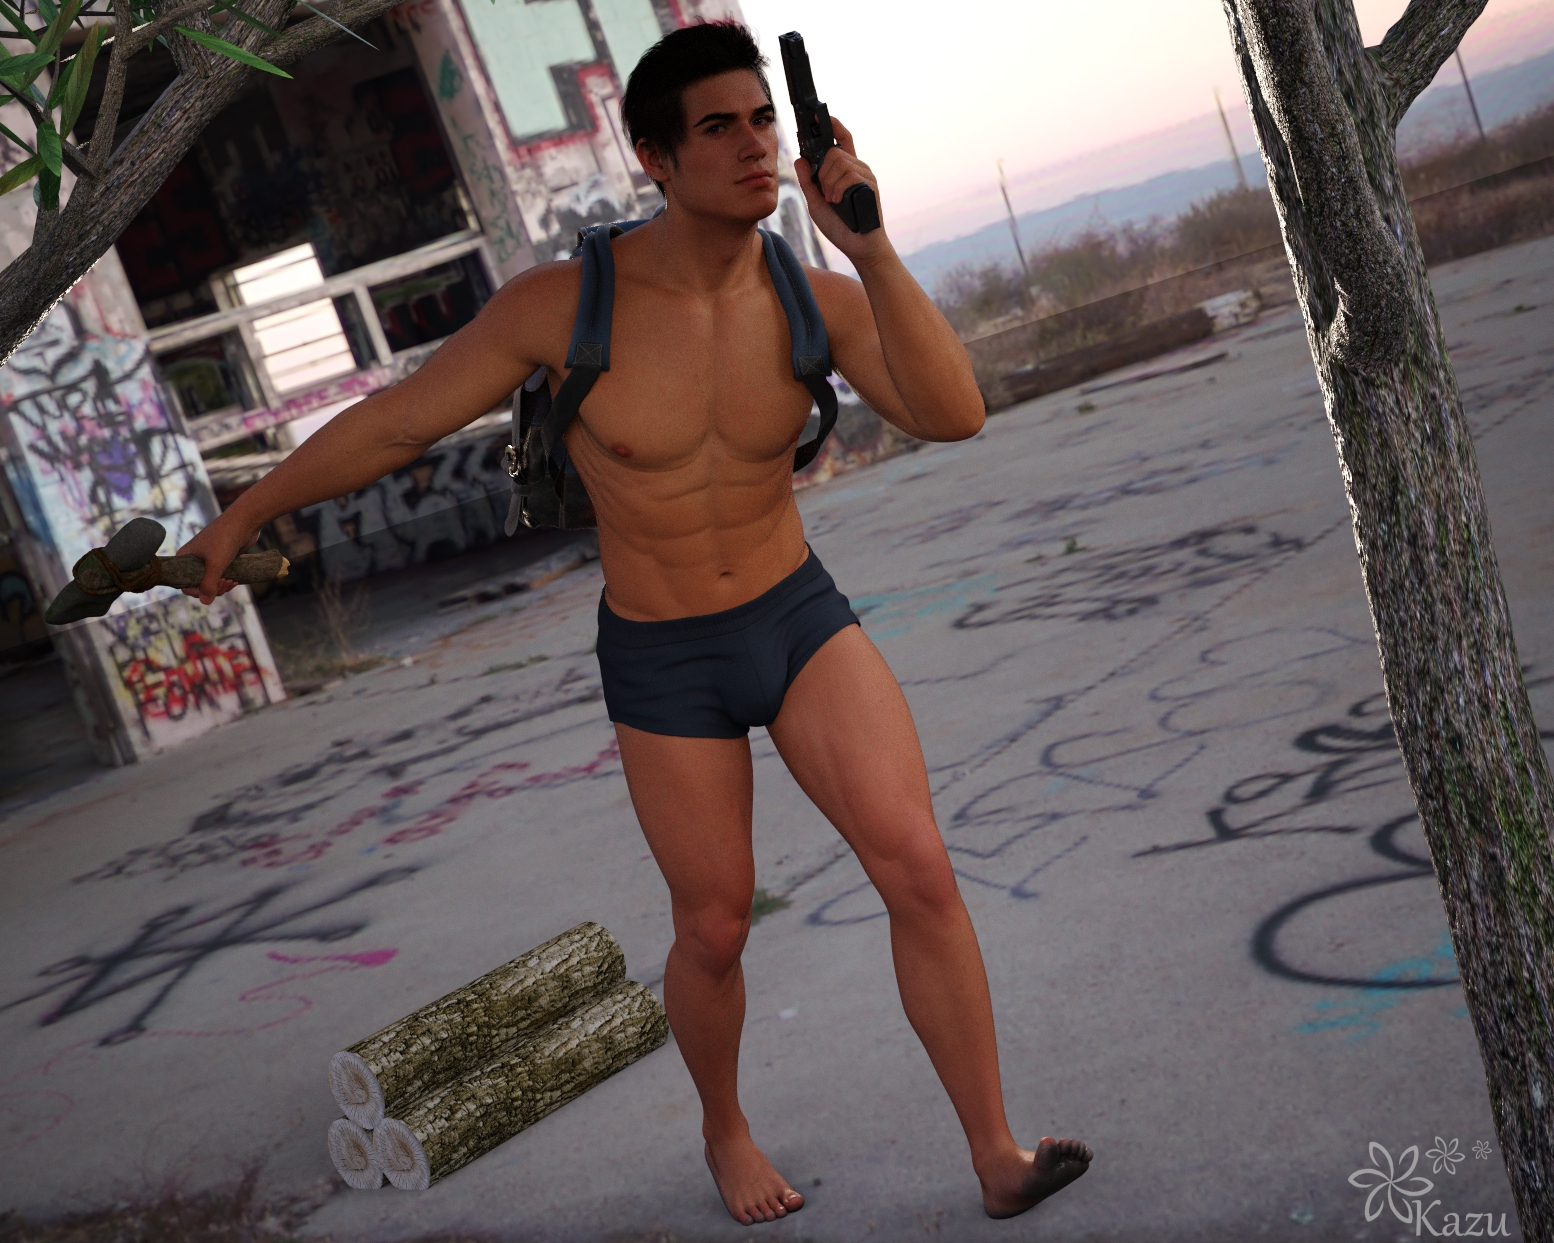 daytime, oc, original character, original, 3d, 3d (artwork), 1boy, 1human, 1male, 3d model, backpack, barefoot, boxers only, bulge, bulge through clothing, day, firearm, gun, holding weapon, kazuworks, lean body, lean muscle, male, male focus, male only, nonsexual, nonsexual nudity, outdoors, partially naked male, partially nude, semi nude, solo, solo focus, solo male, survival horror, survivalist, young adult, young man, 